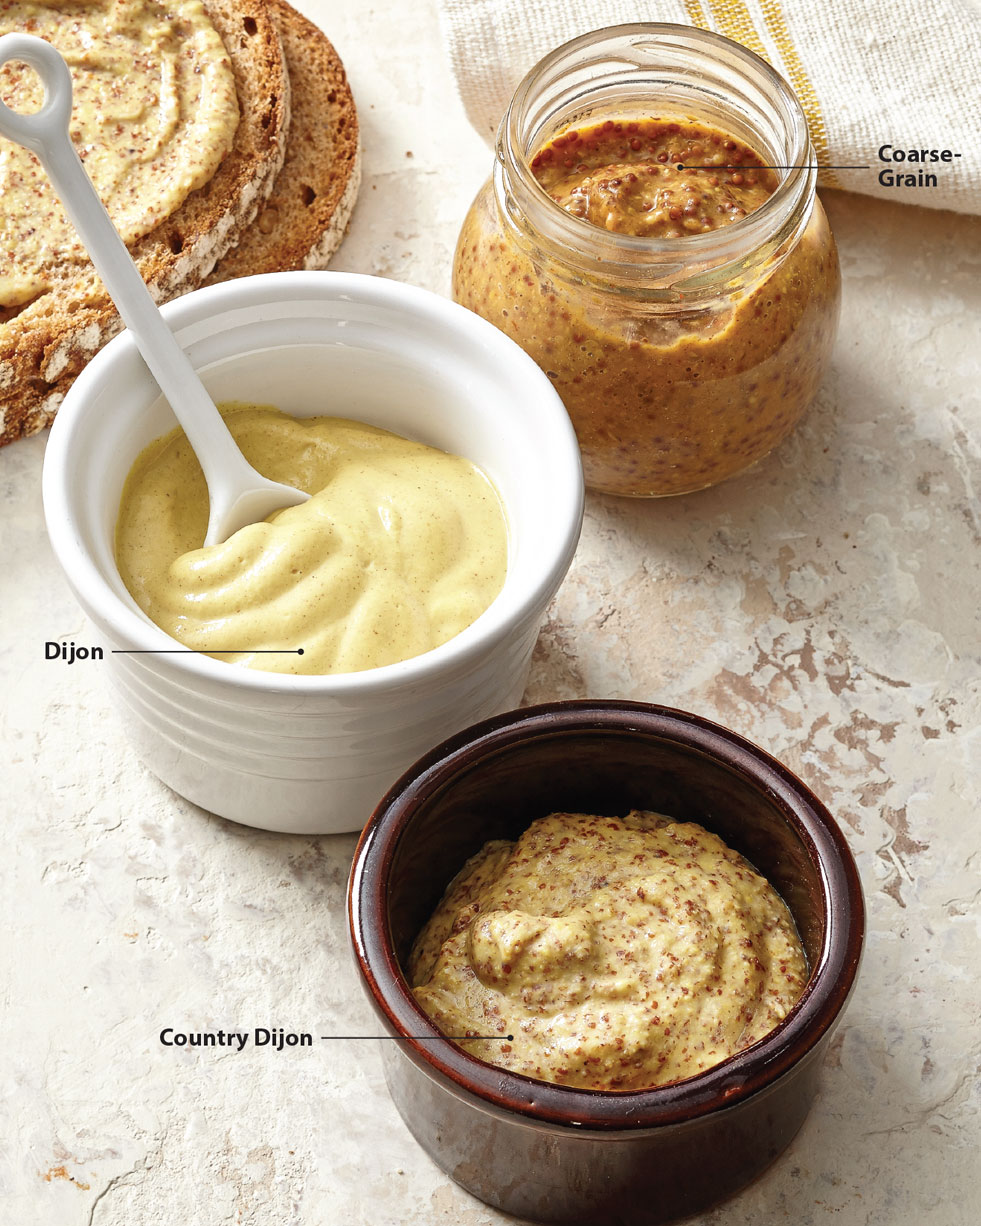 What is country Dijon mustard? How is country Dijon different from regular Dijon?